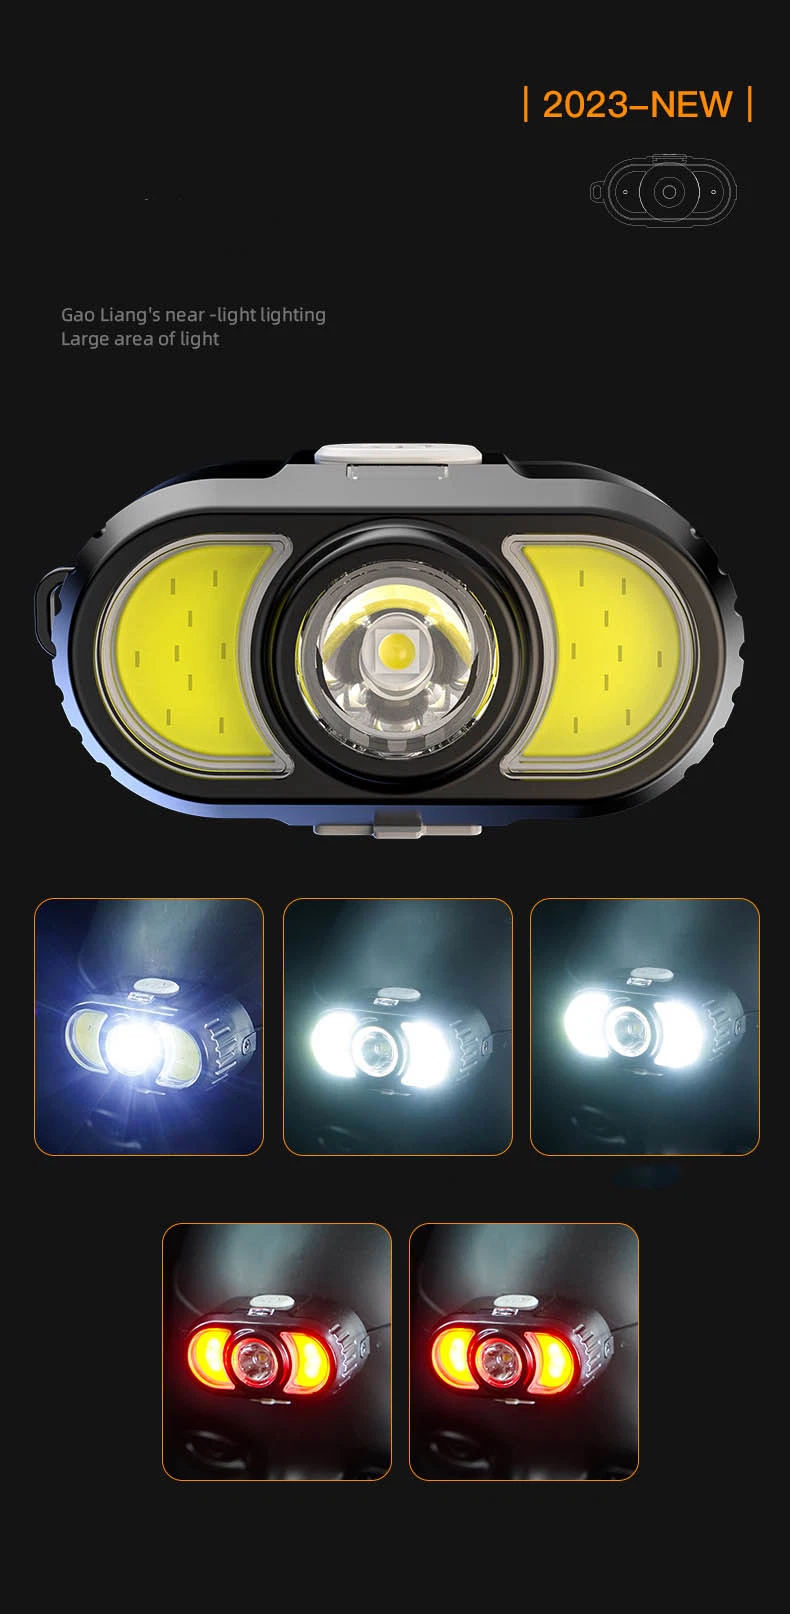 Goldmore1 Strong Long-Distance Headlamp USB Rechargeable Portable Head Lamp Outdoor Night Running Light Night Fishing Light